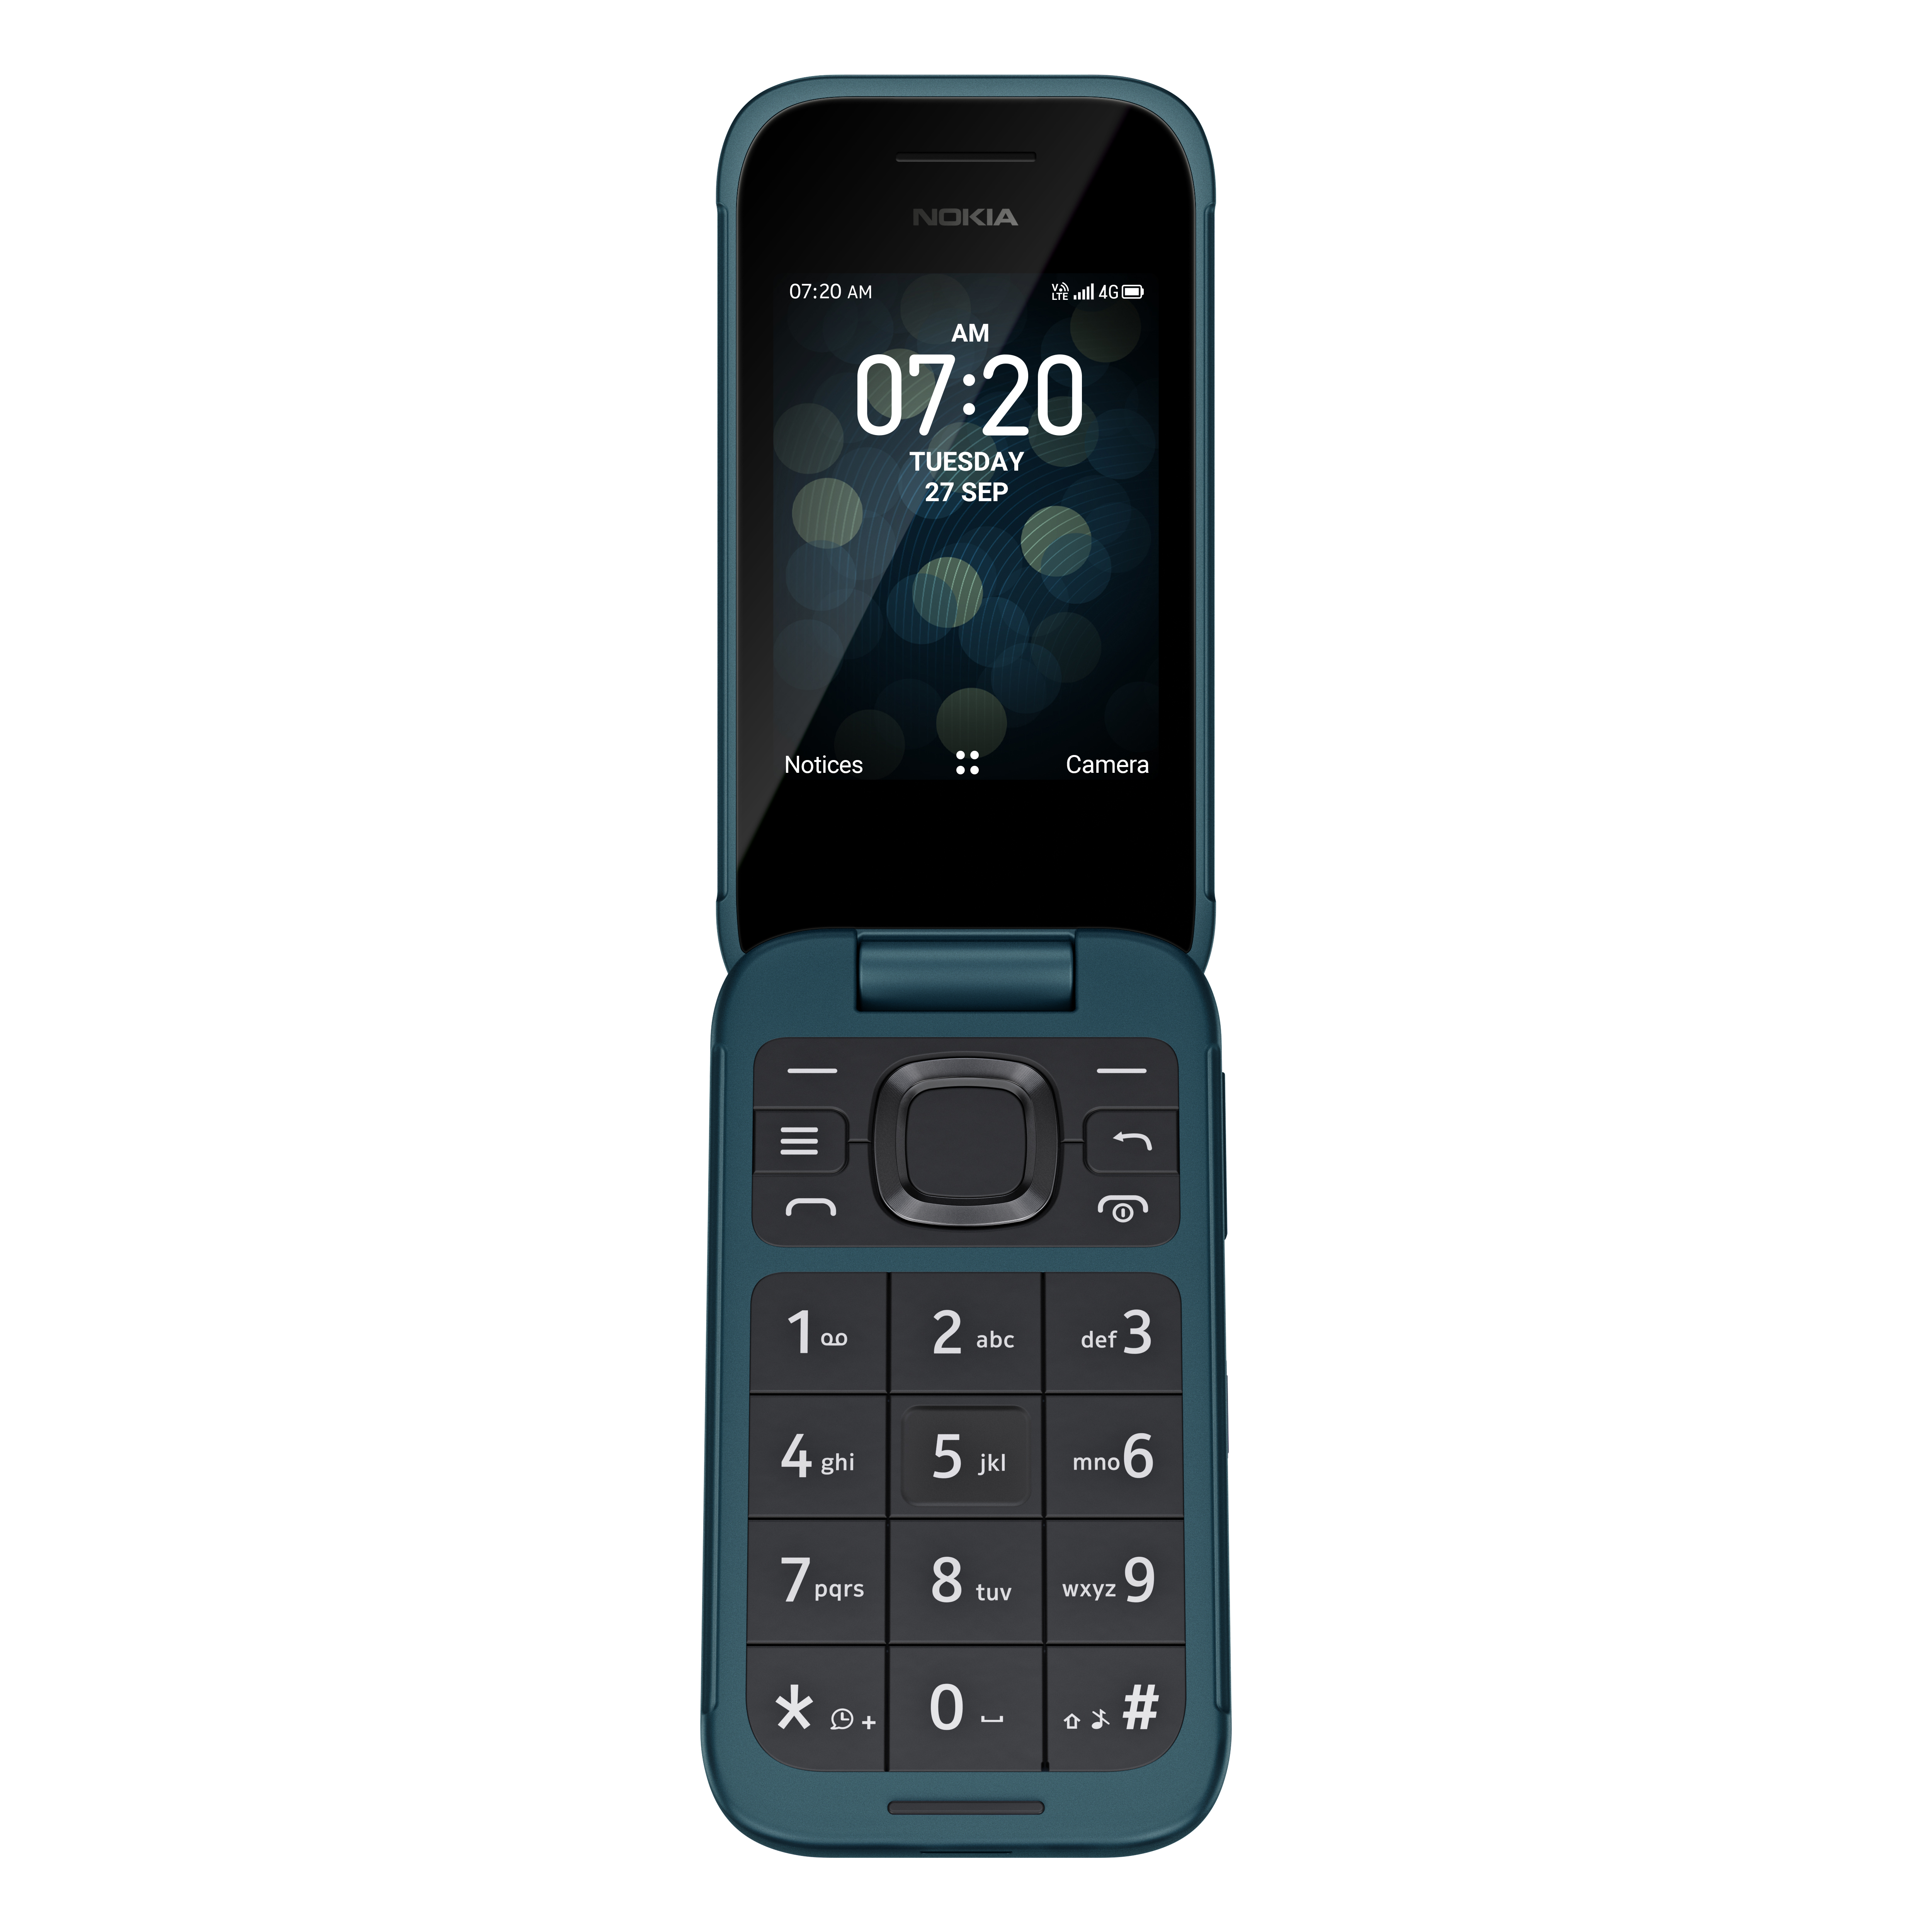 Best Nokia phone 2023: Find the finest Nokia smartphone for you